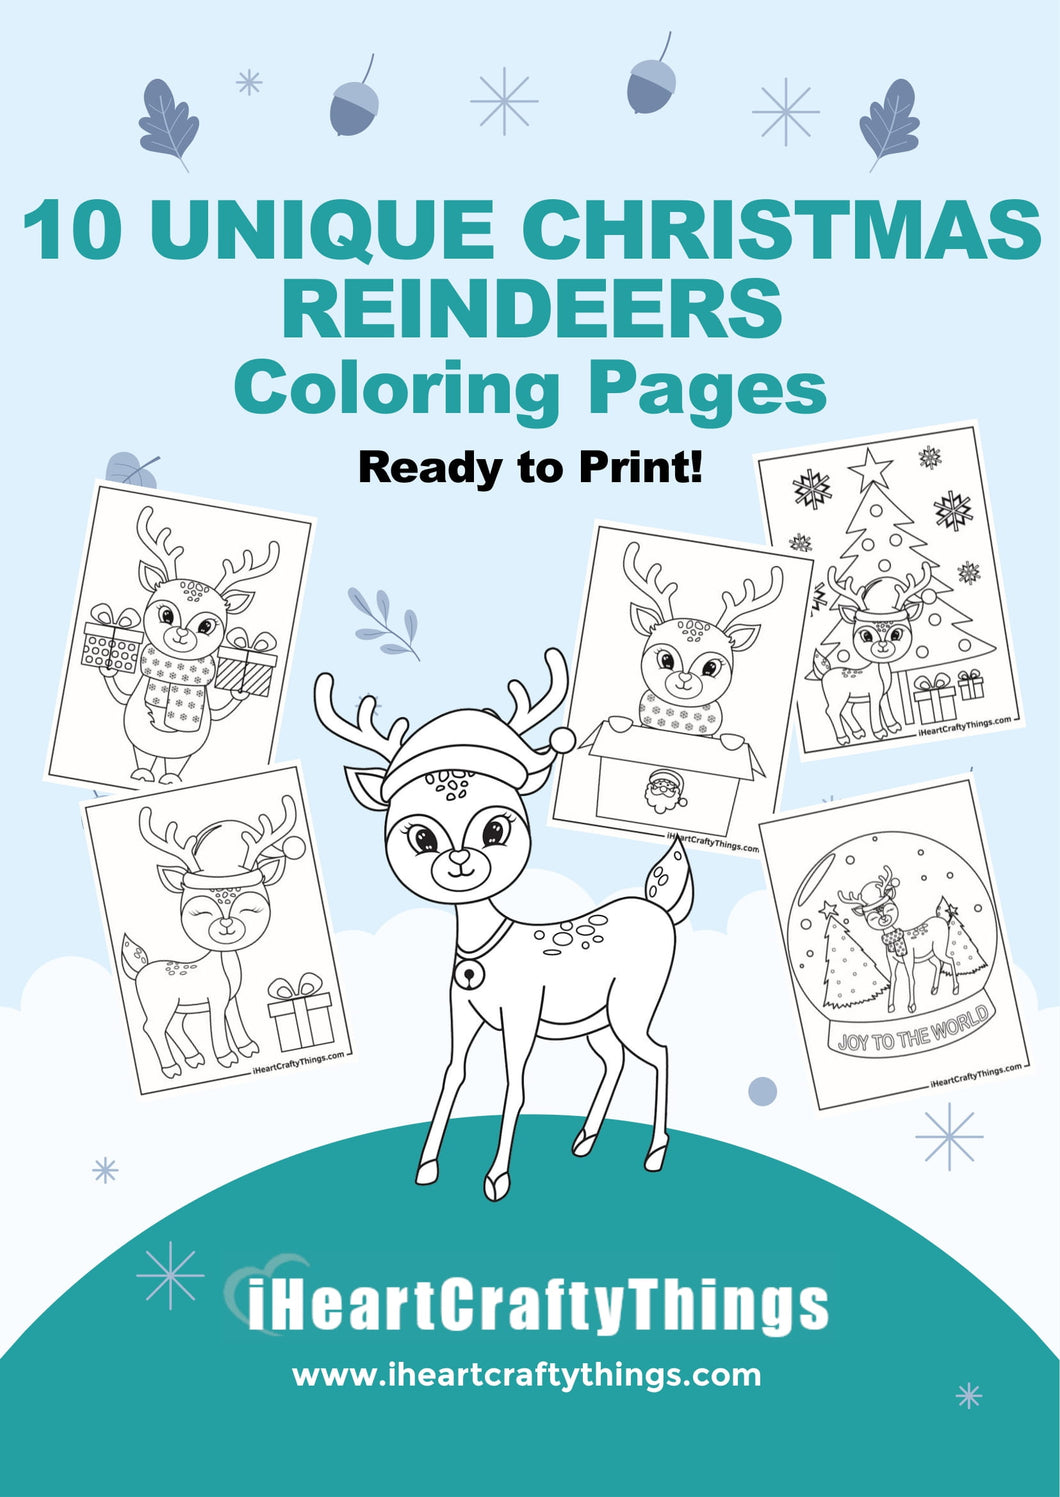 10 CHRISTMAS REINDEERS COLORING PAGES